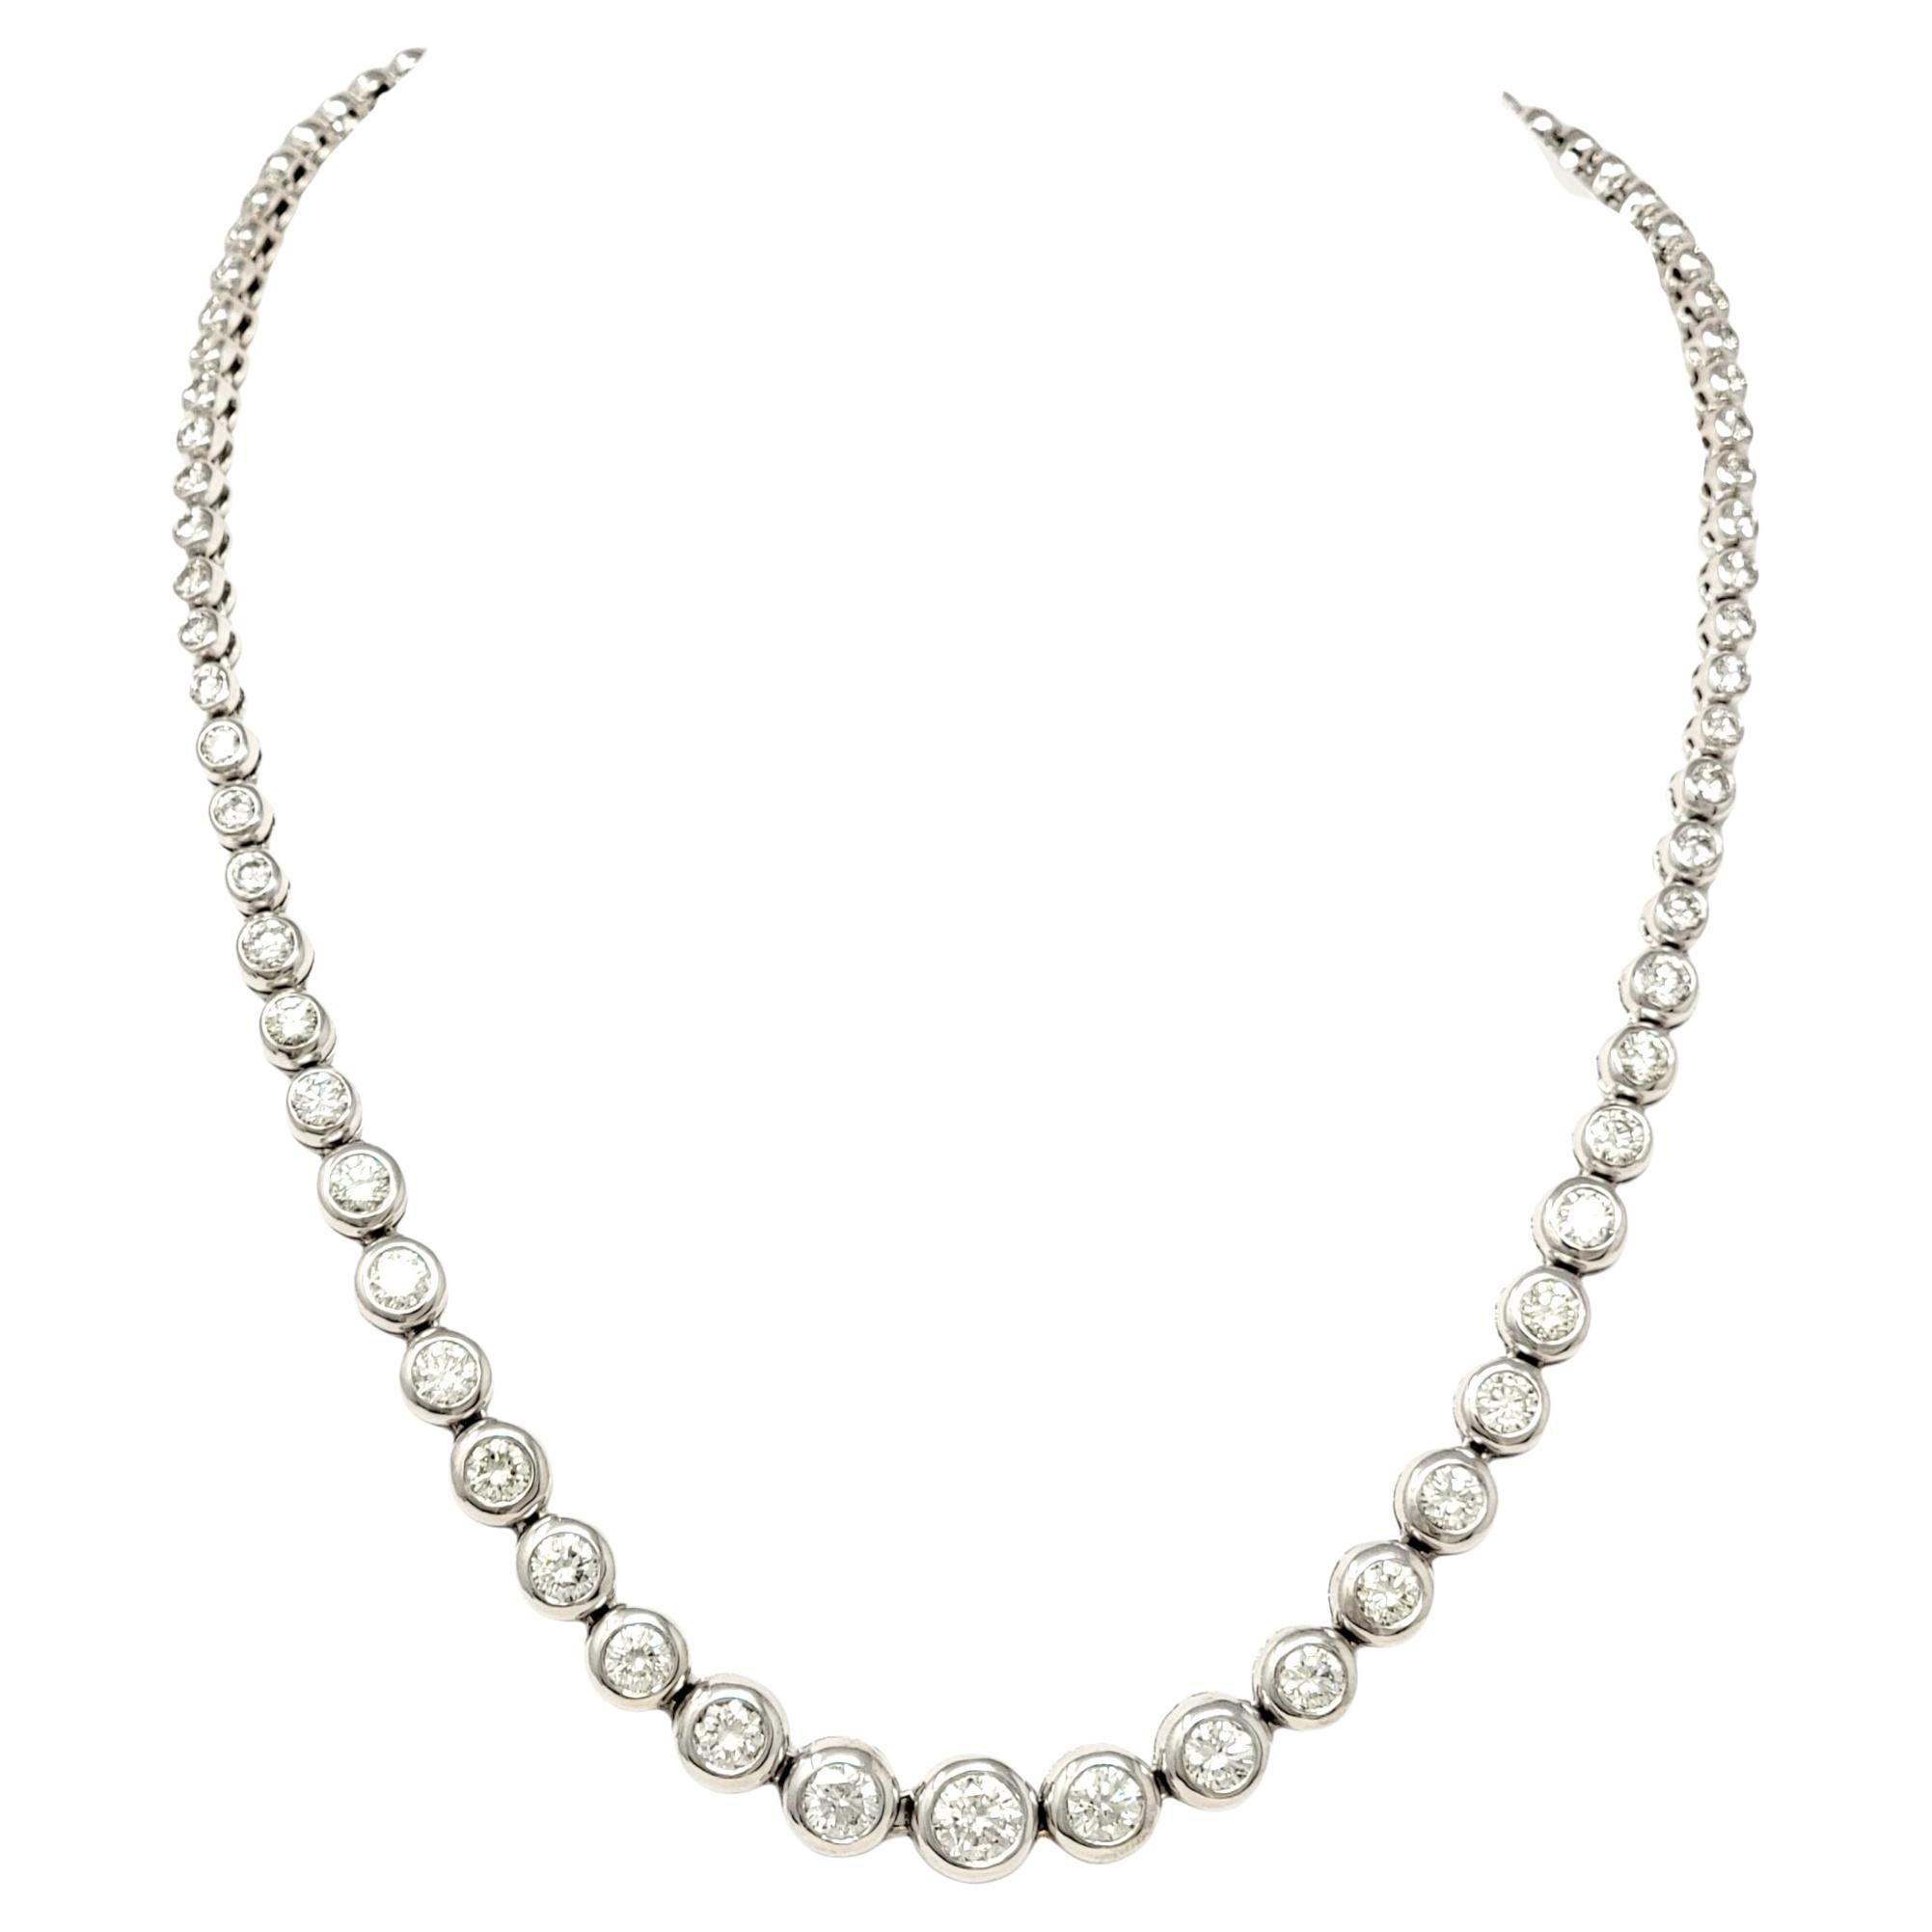 This showstopper 16.05 carat diamond necklace will absolutely take your breath away. This strikingly sparkly piece features 83 icy white natural round diamonds bezel set in polished white gold and set in a single graduated row, offering a clear,